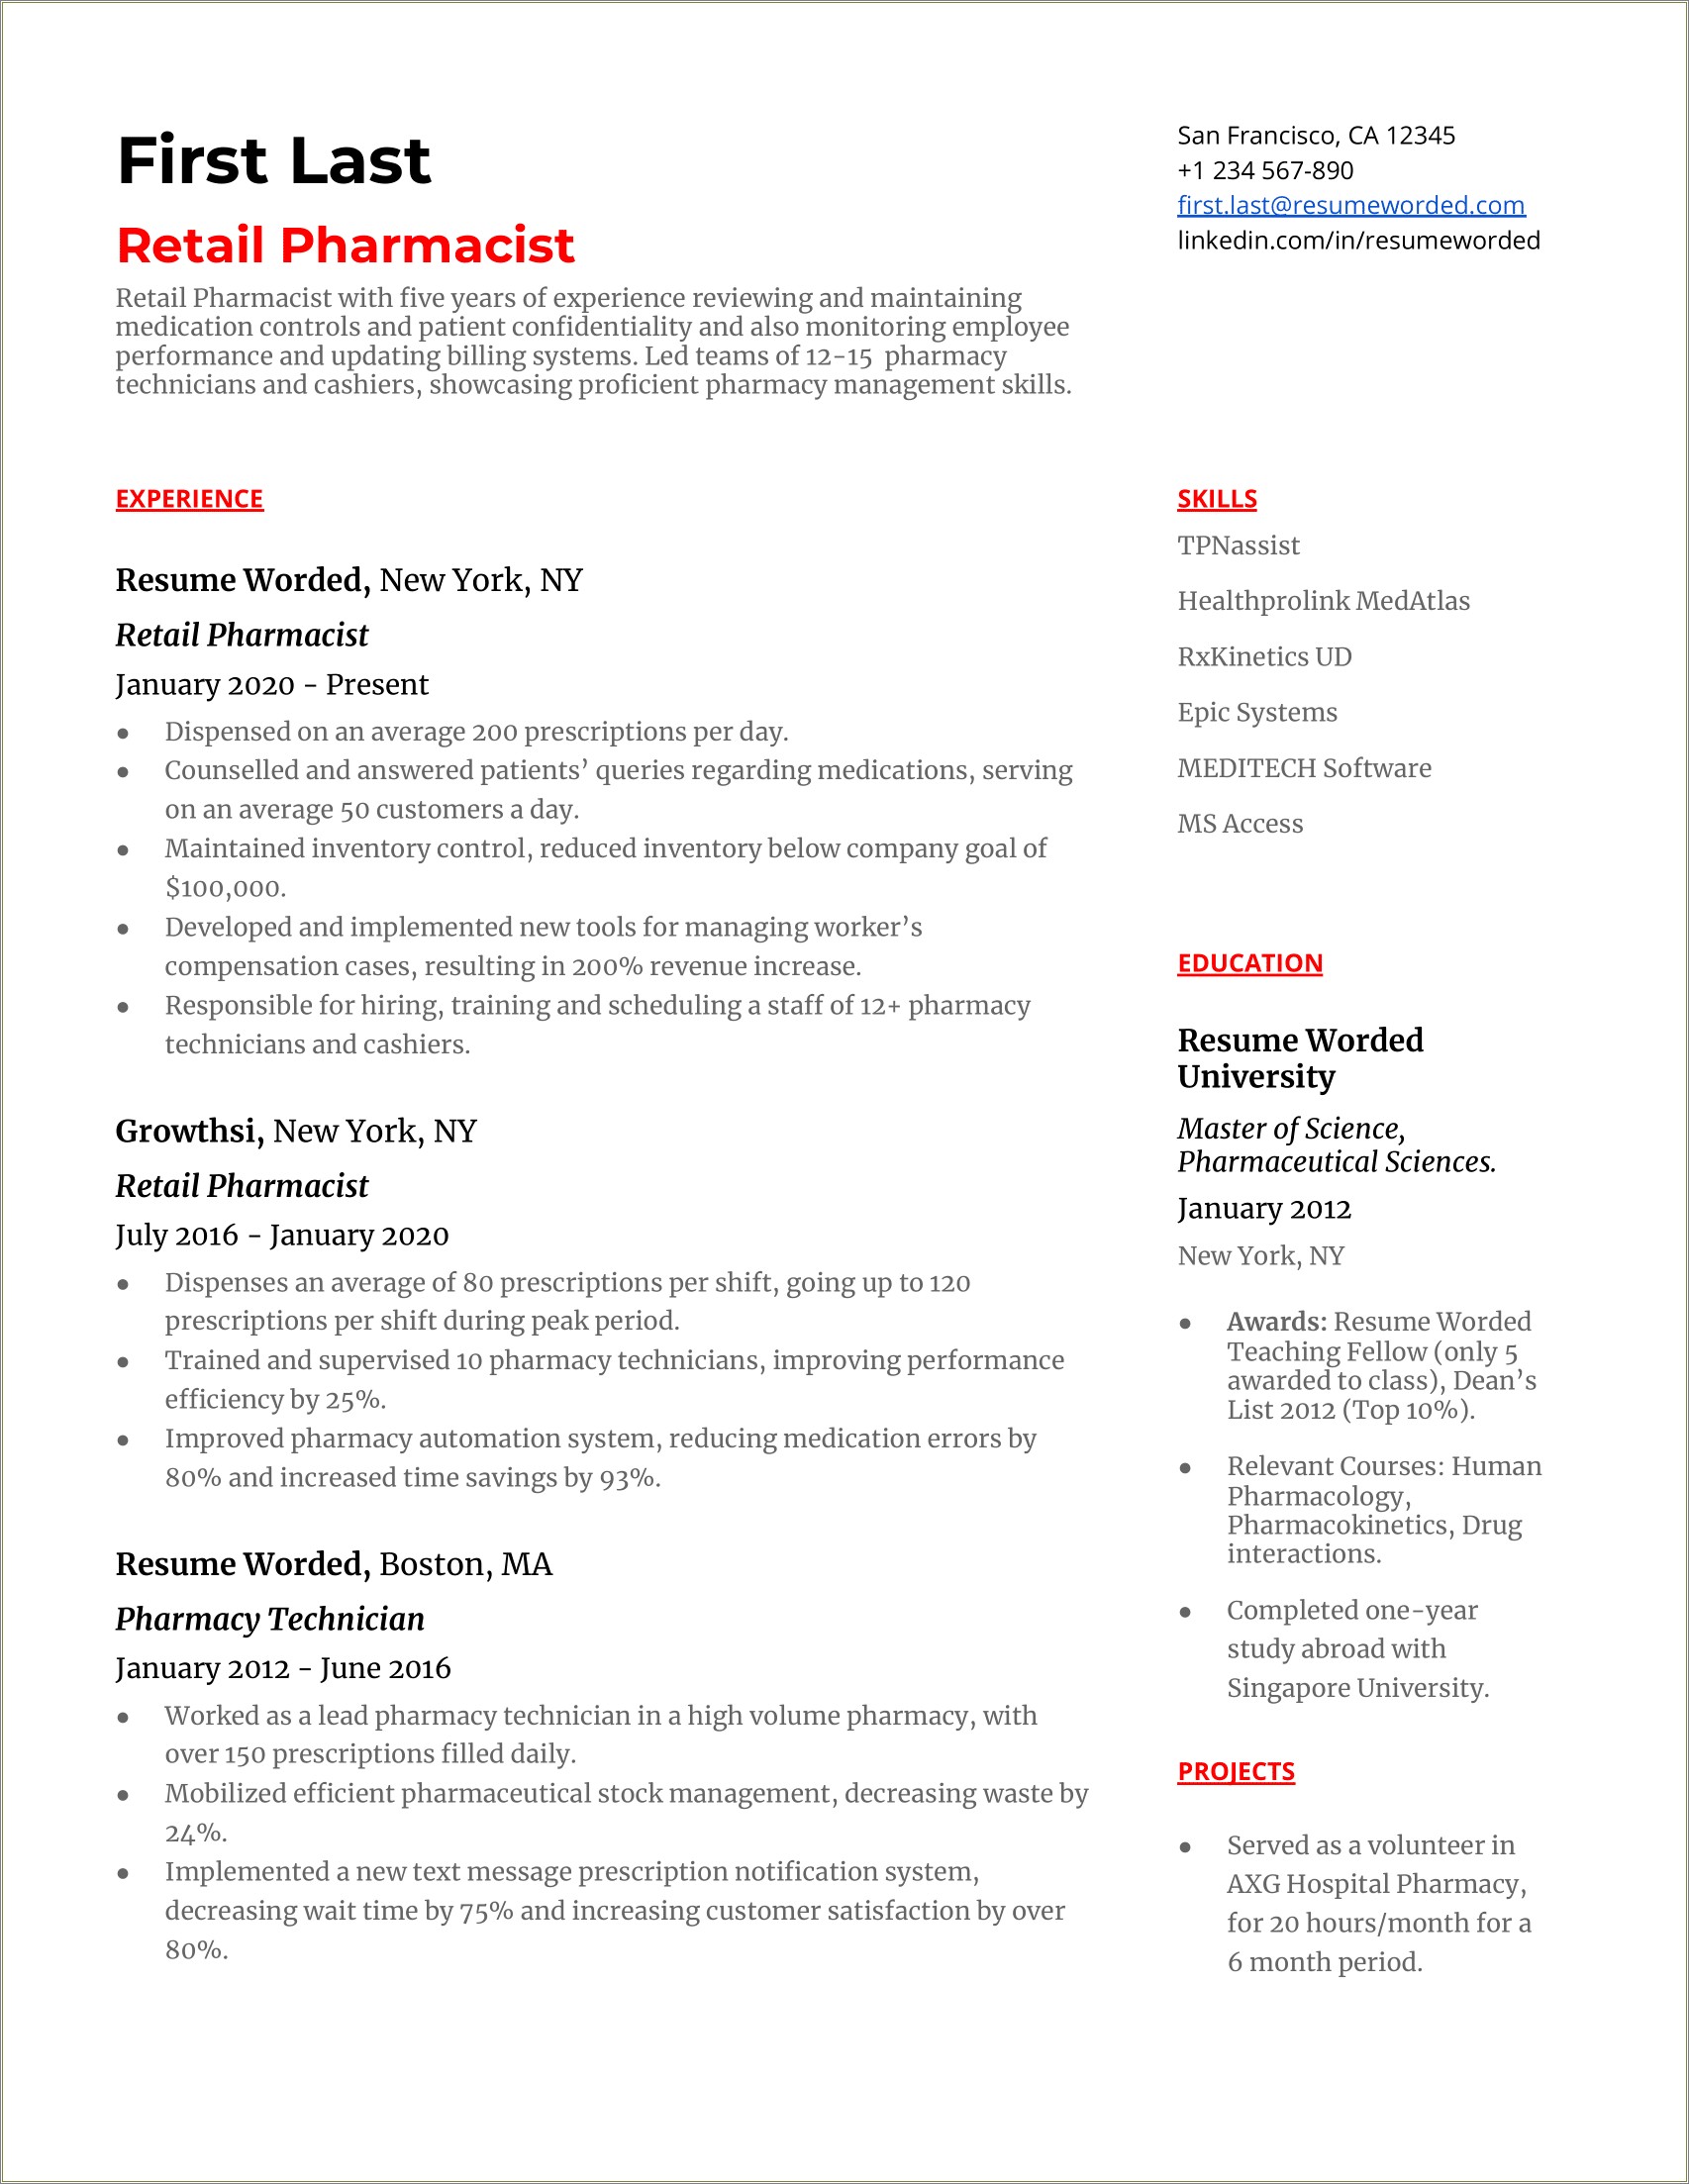 Resumes For New Account Managers